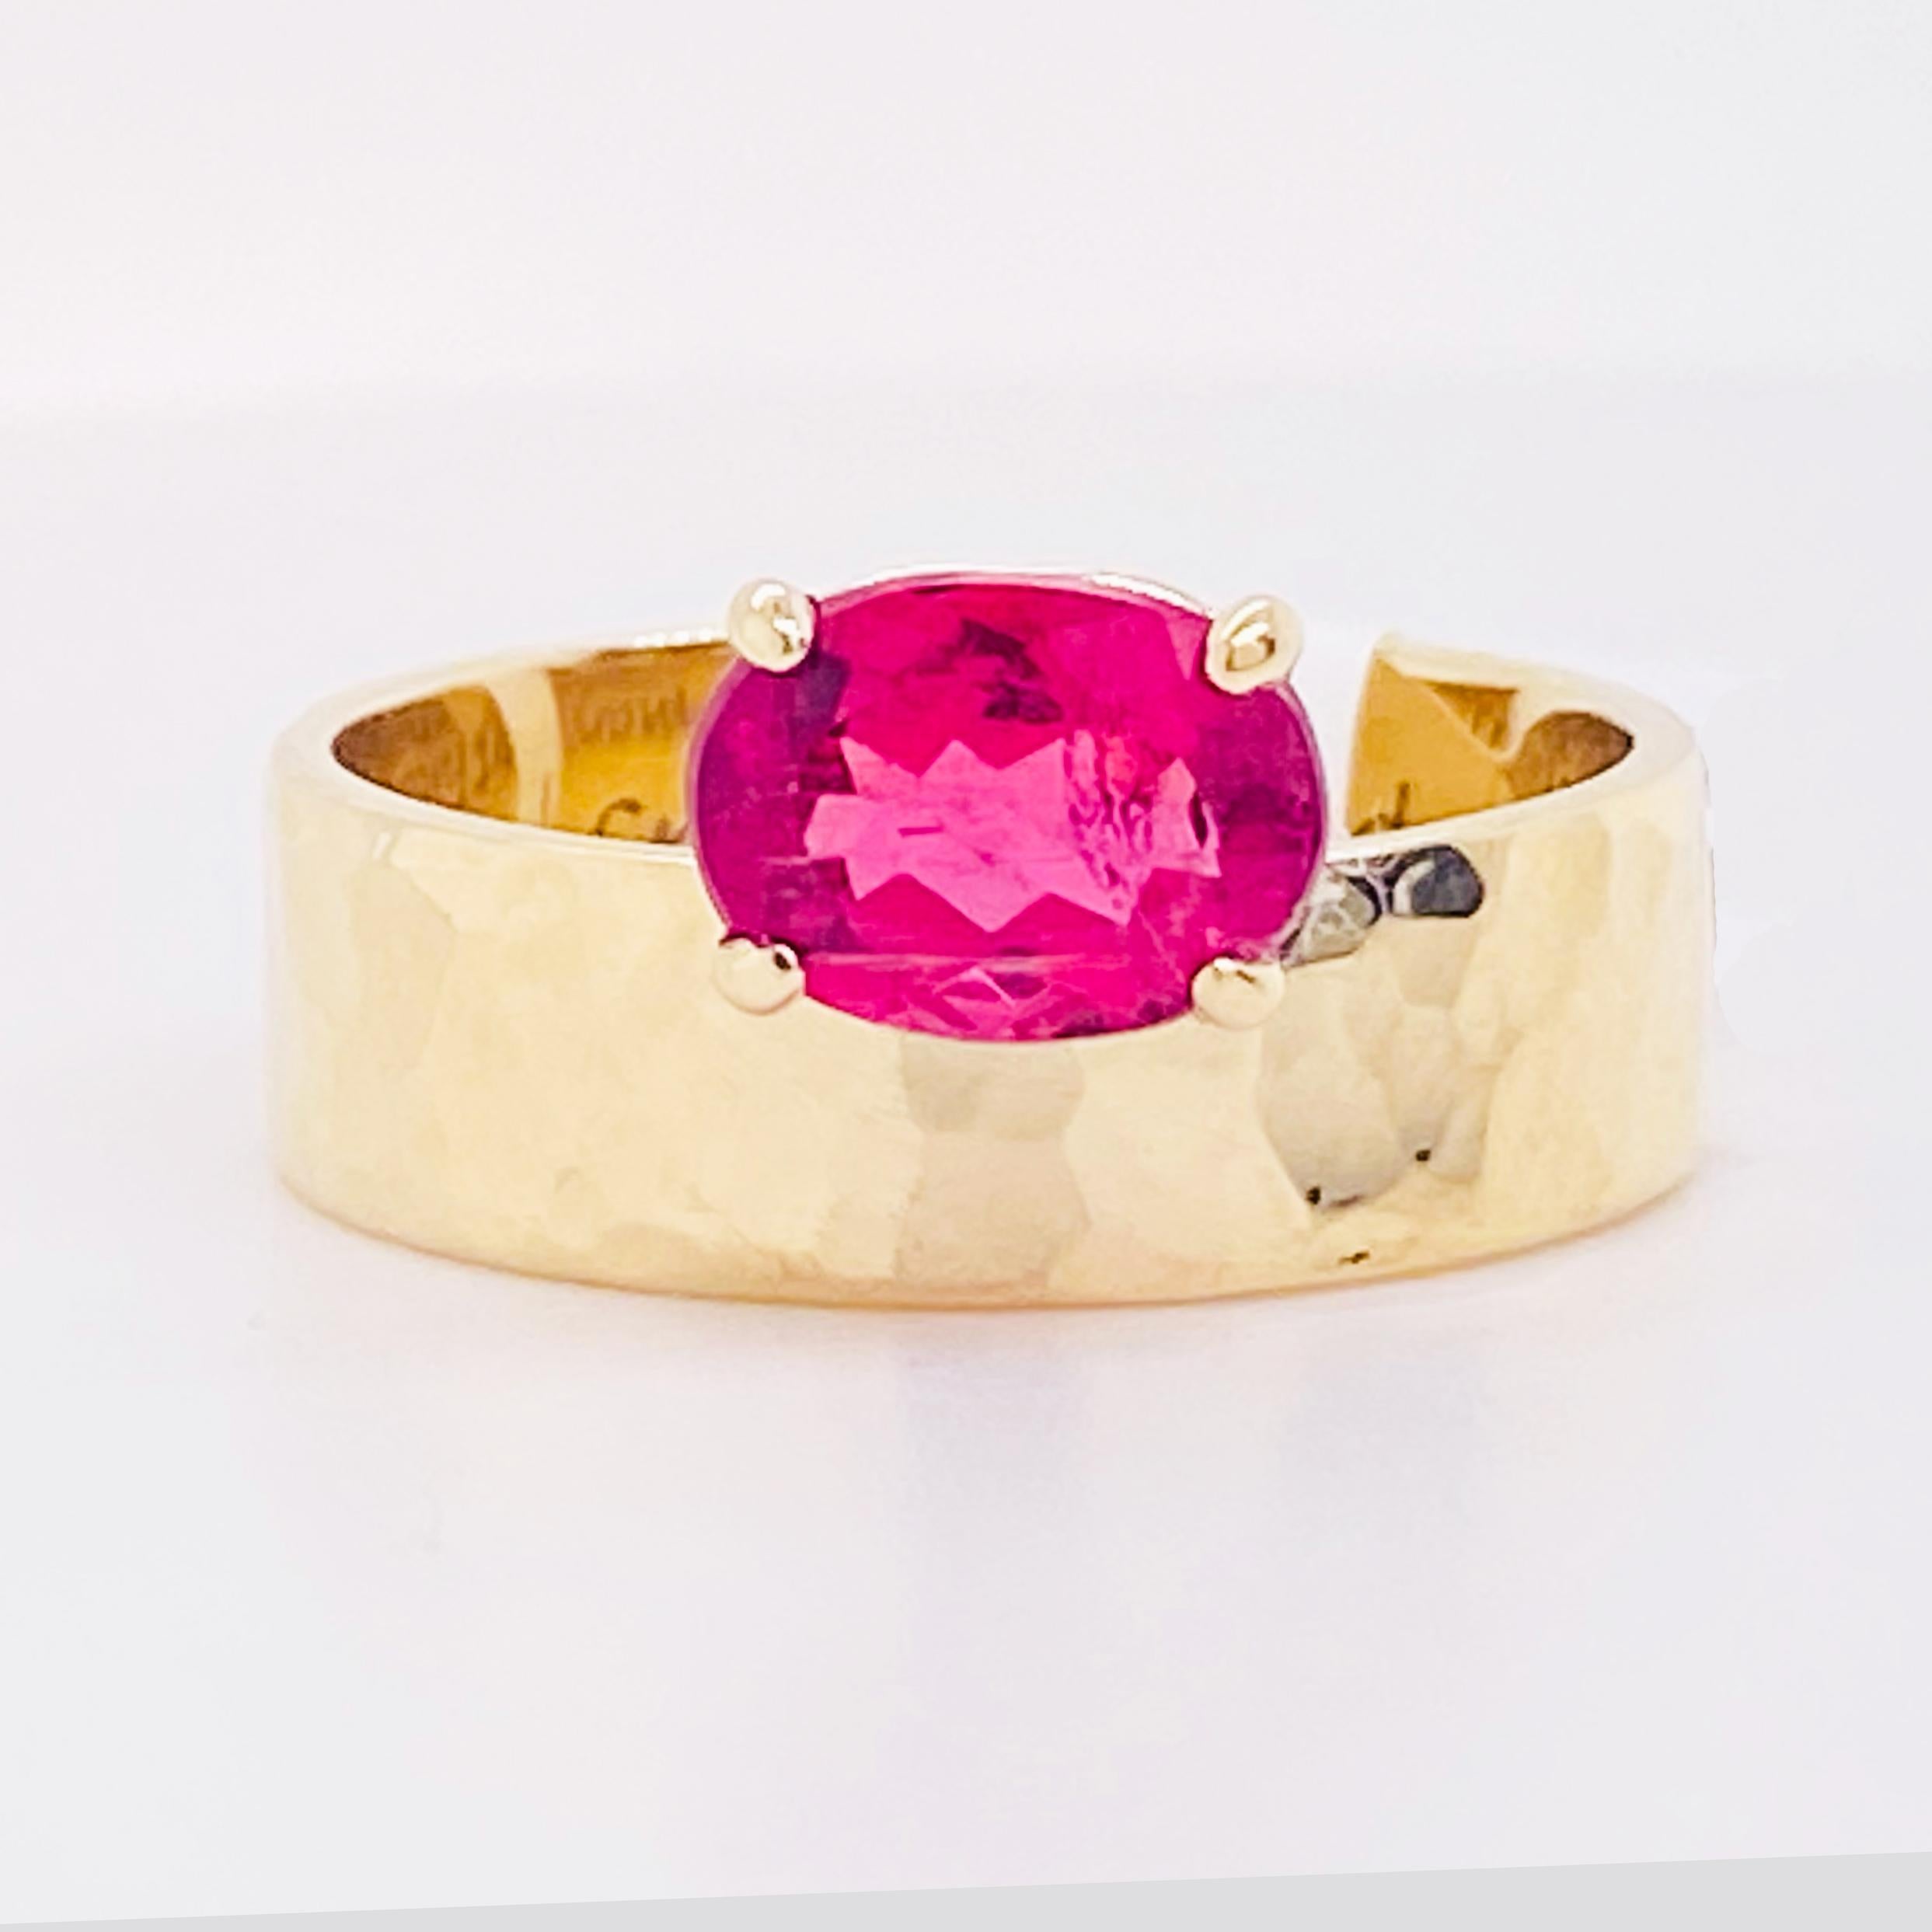 Pink Tourmaline Oval Ring 14K Yellow Gold Hammered Wide Band 1.32 Carat Gemstone For Sale 2